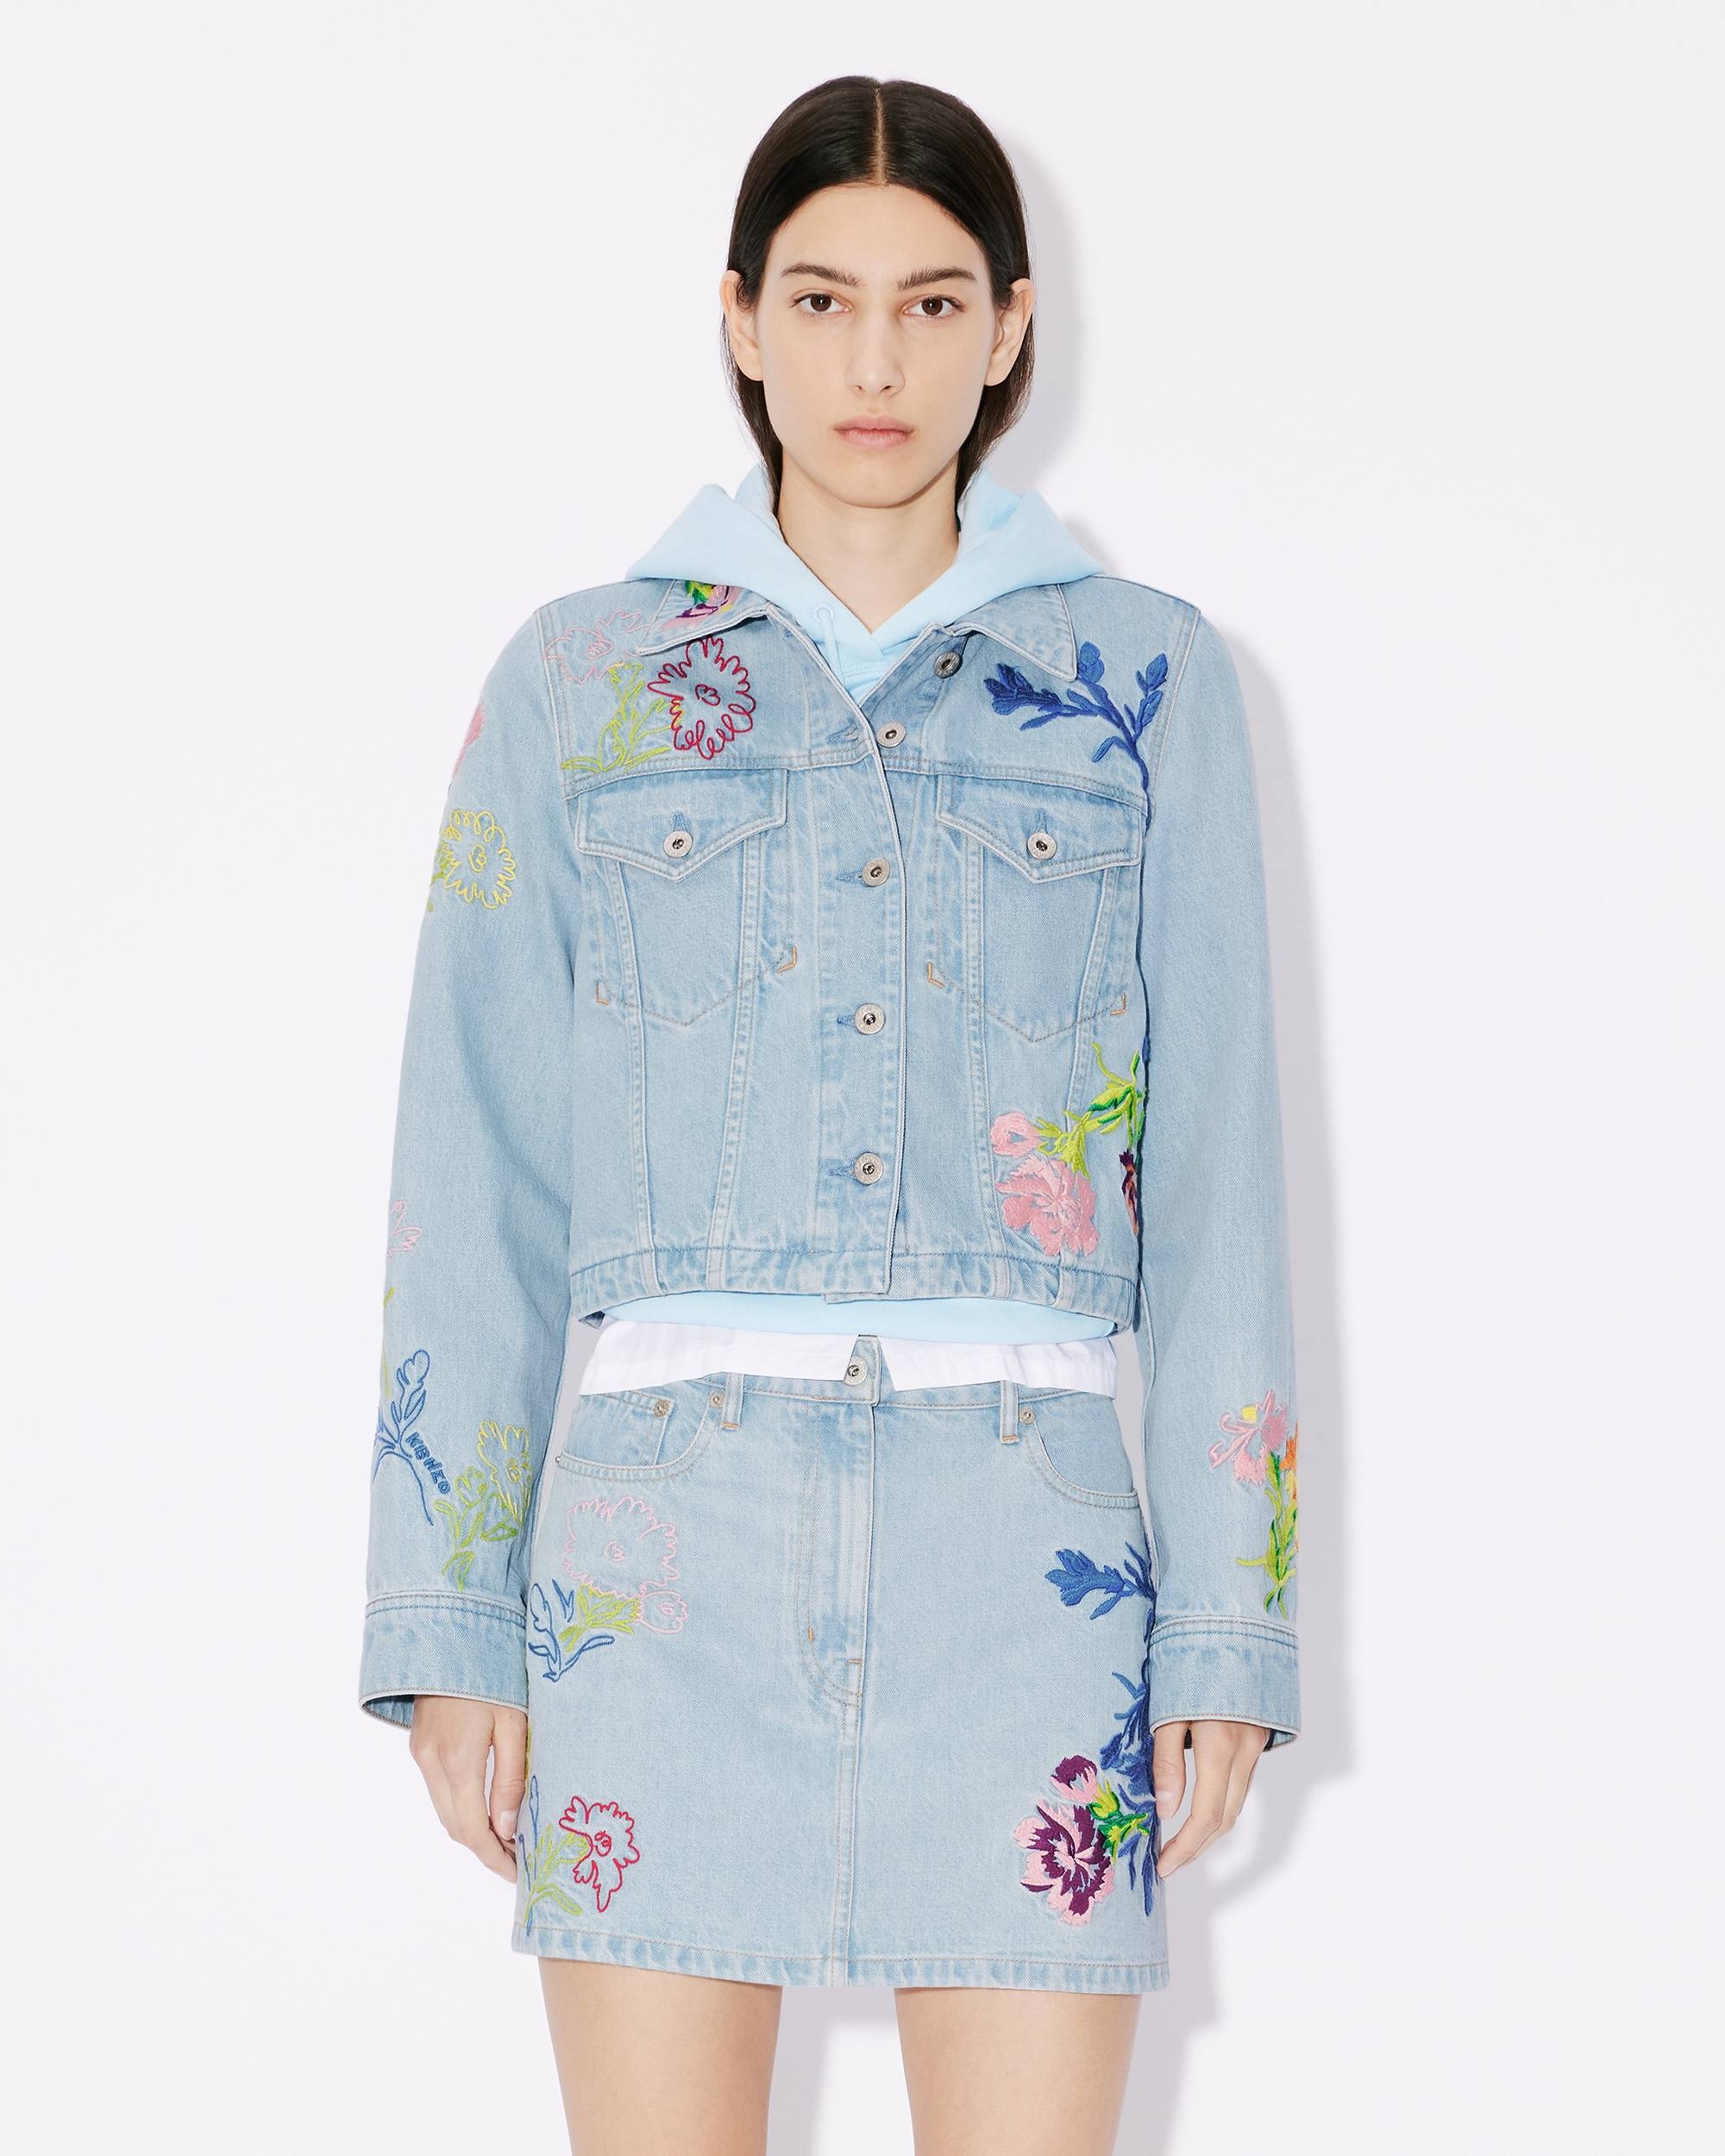 'KENZO Drawn Flowers' embroidered trucker jacket - 3